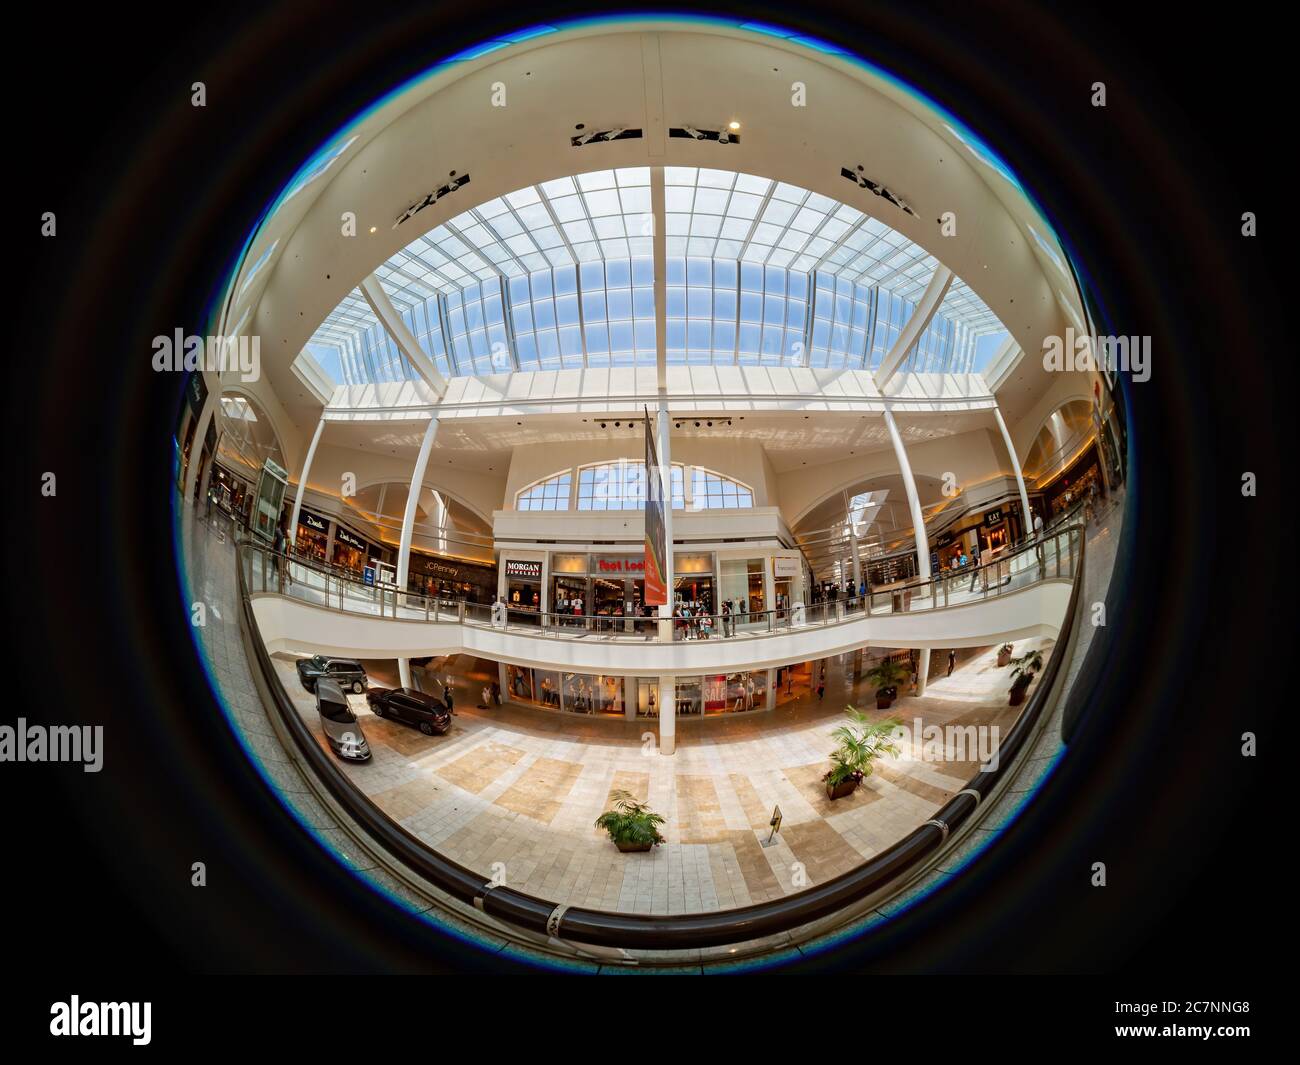 Las Vegas, JAN 7, 2021 - Interior view of the Galleria at Sunset shopping  mall Stock Photo - Alamy